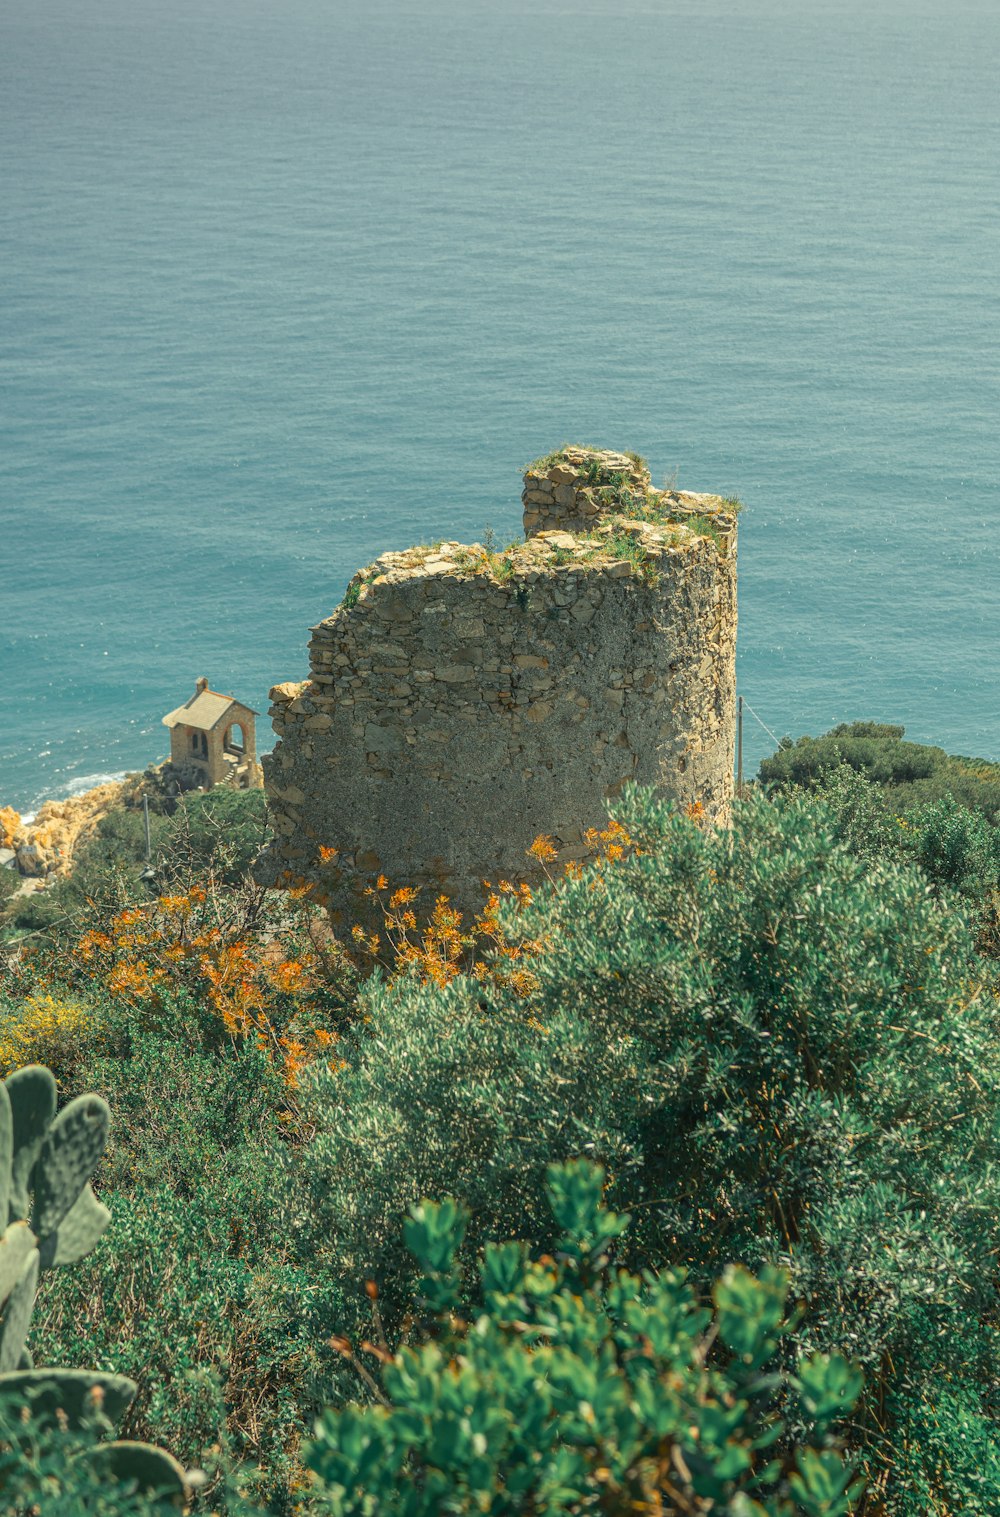 a stone tower on a cliff overlooking the ocean